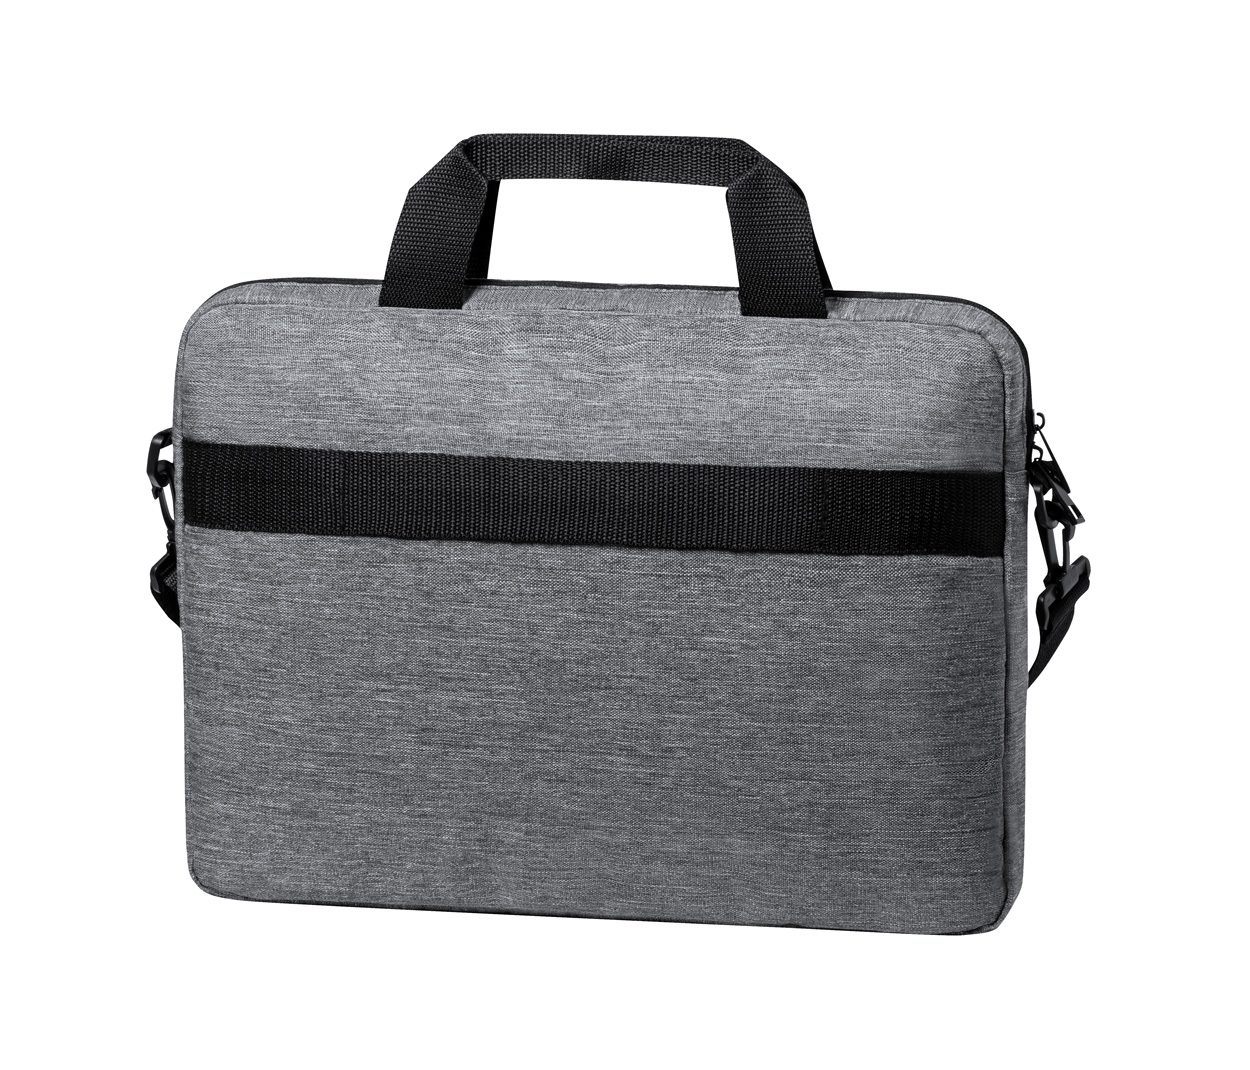 Document bag PIROK made of recycled material - grey